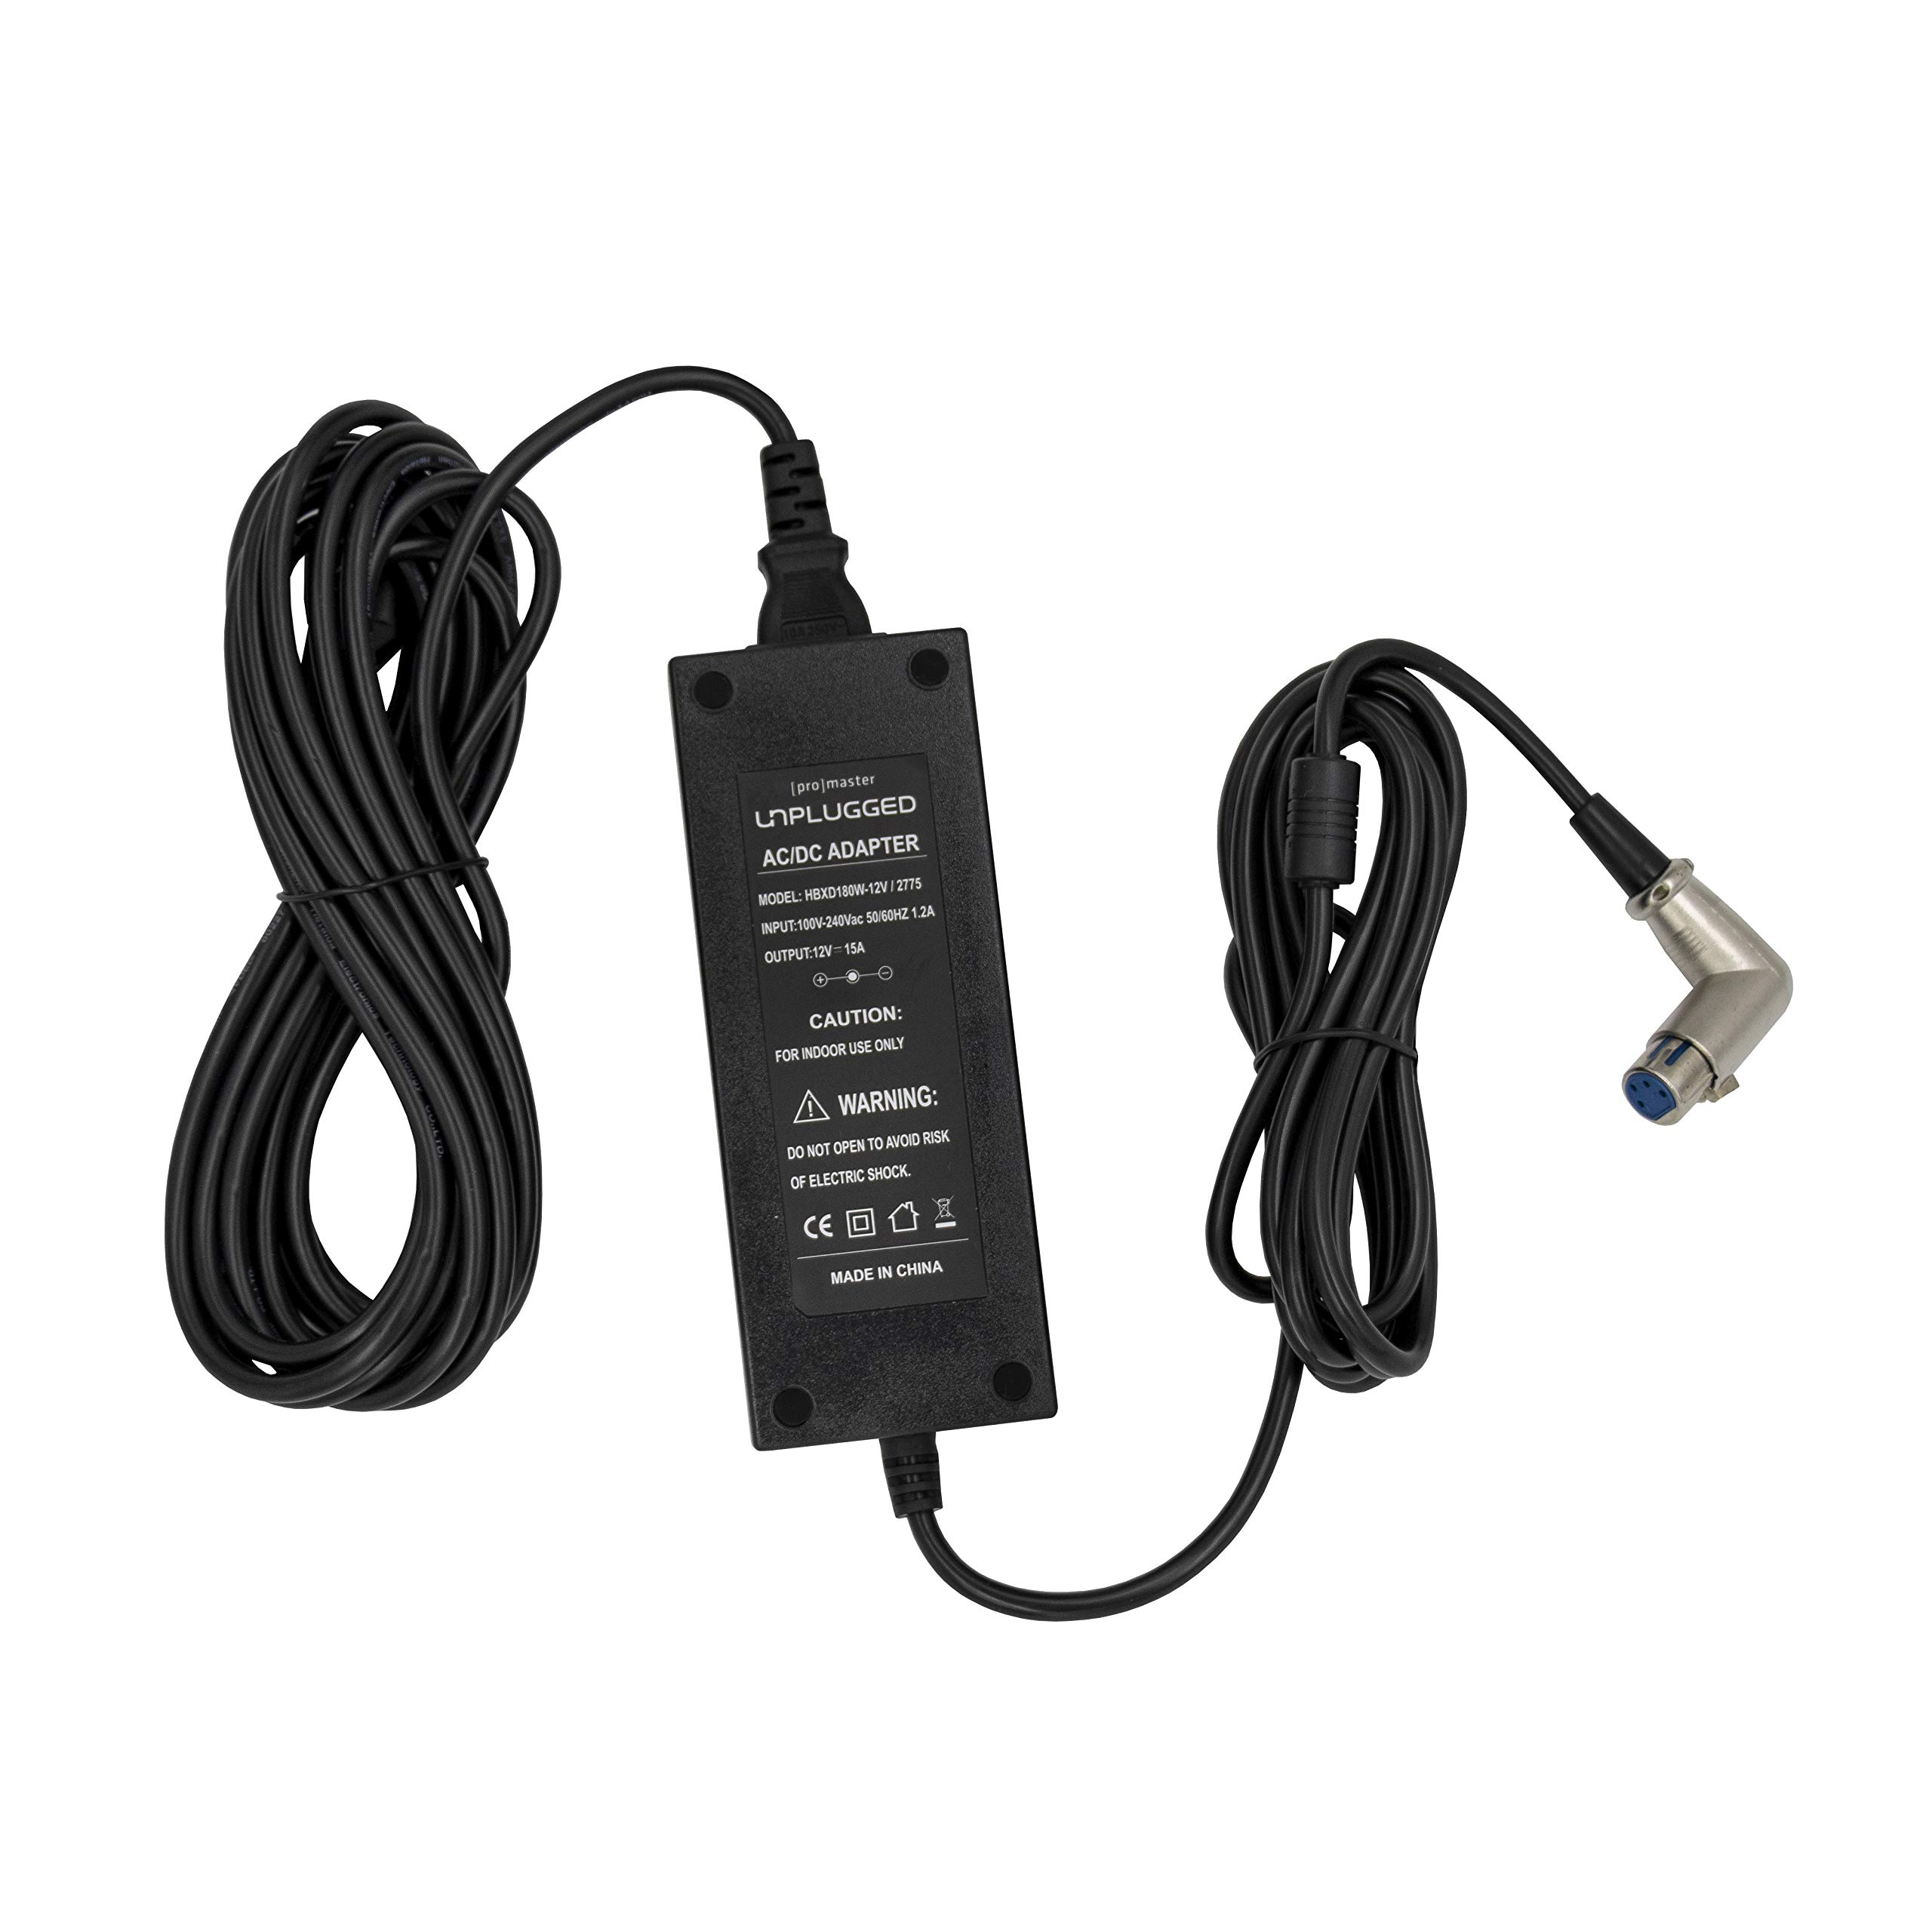 Unplugged power cord